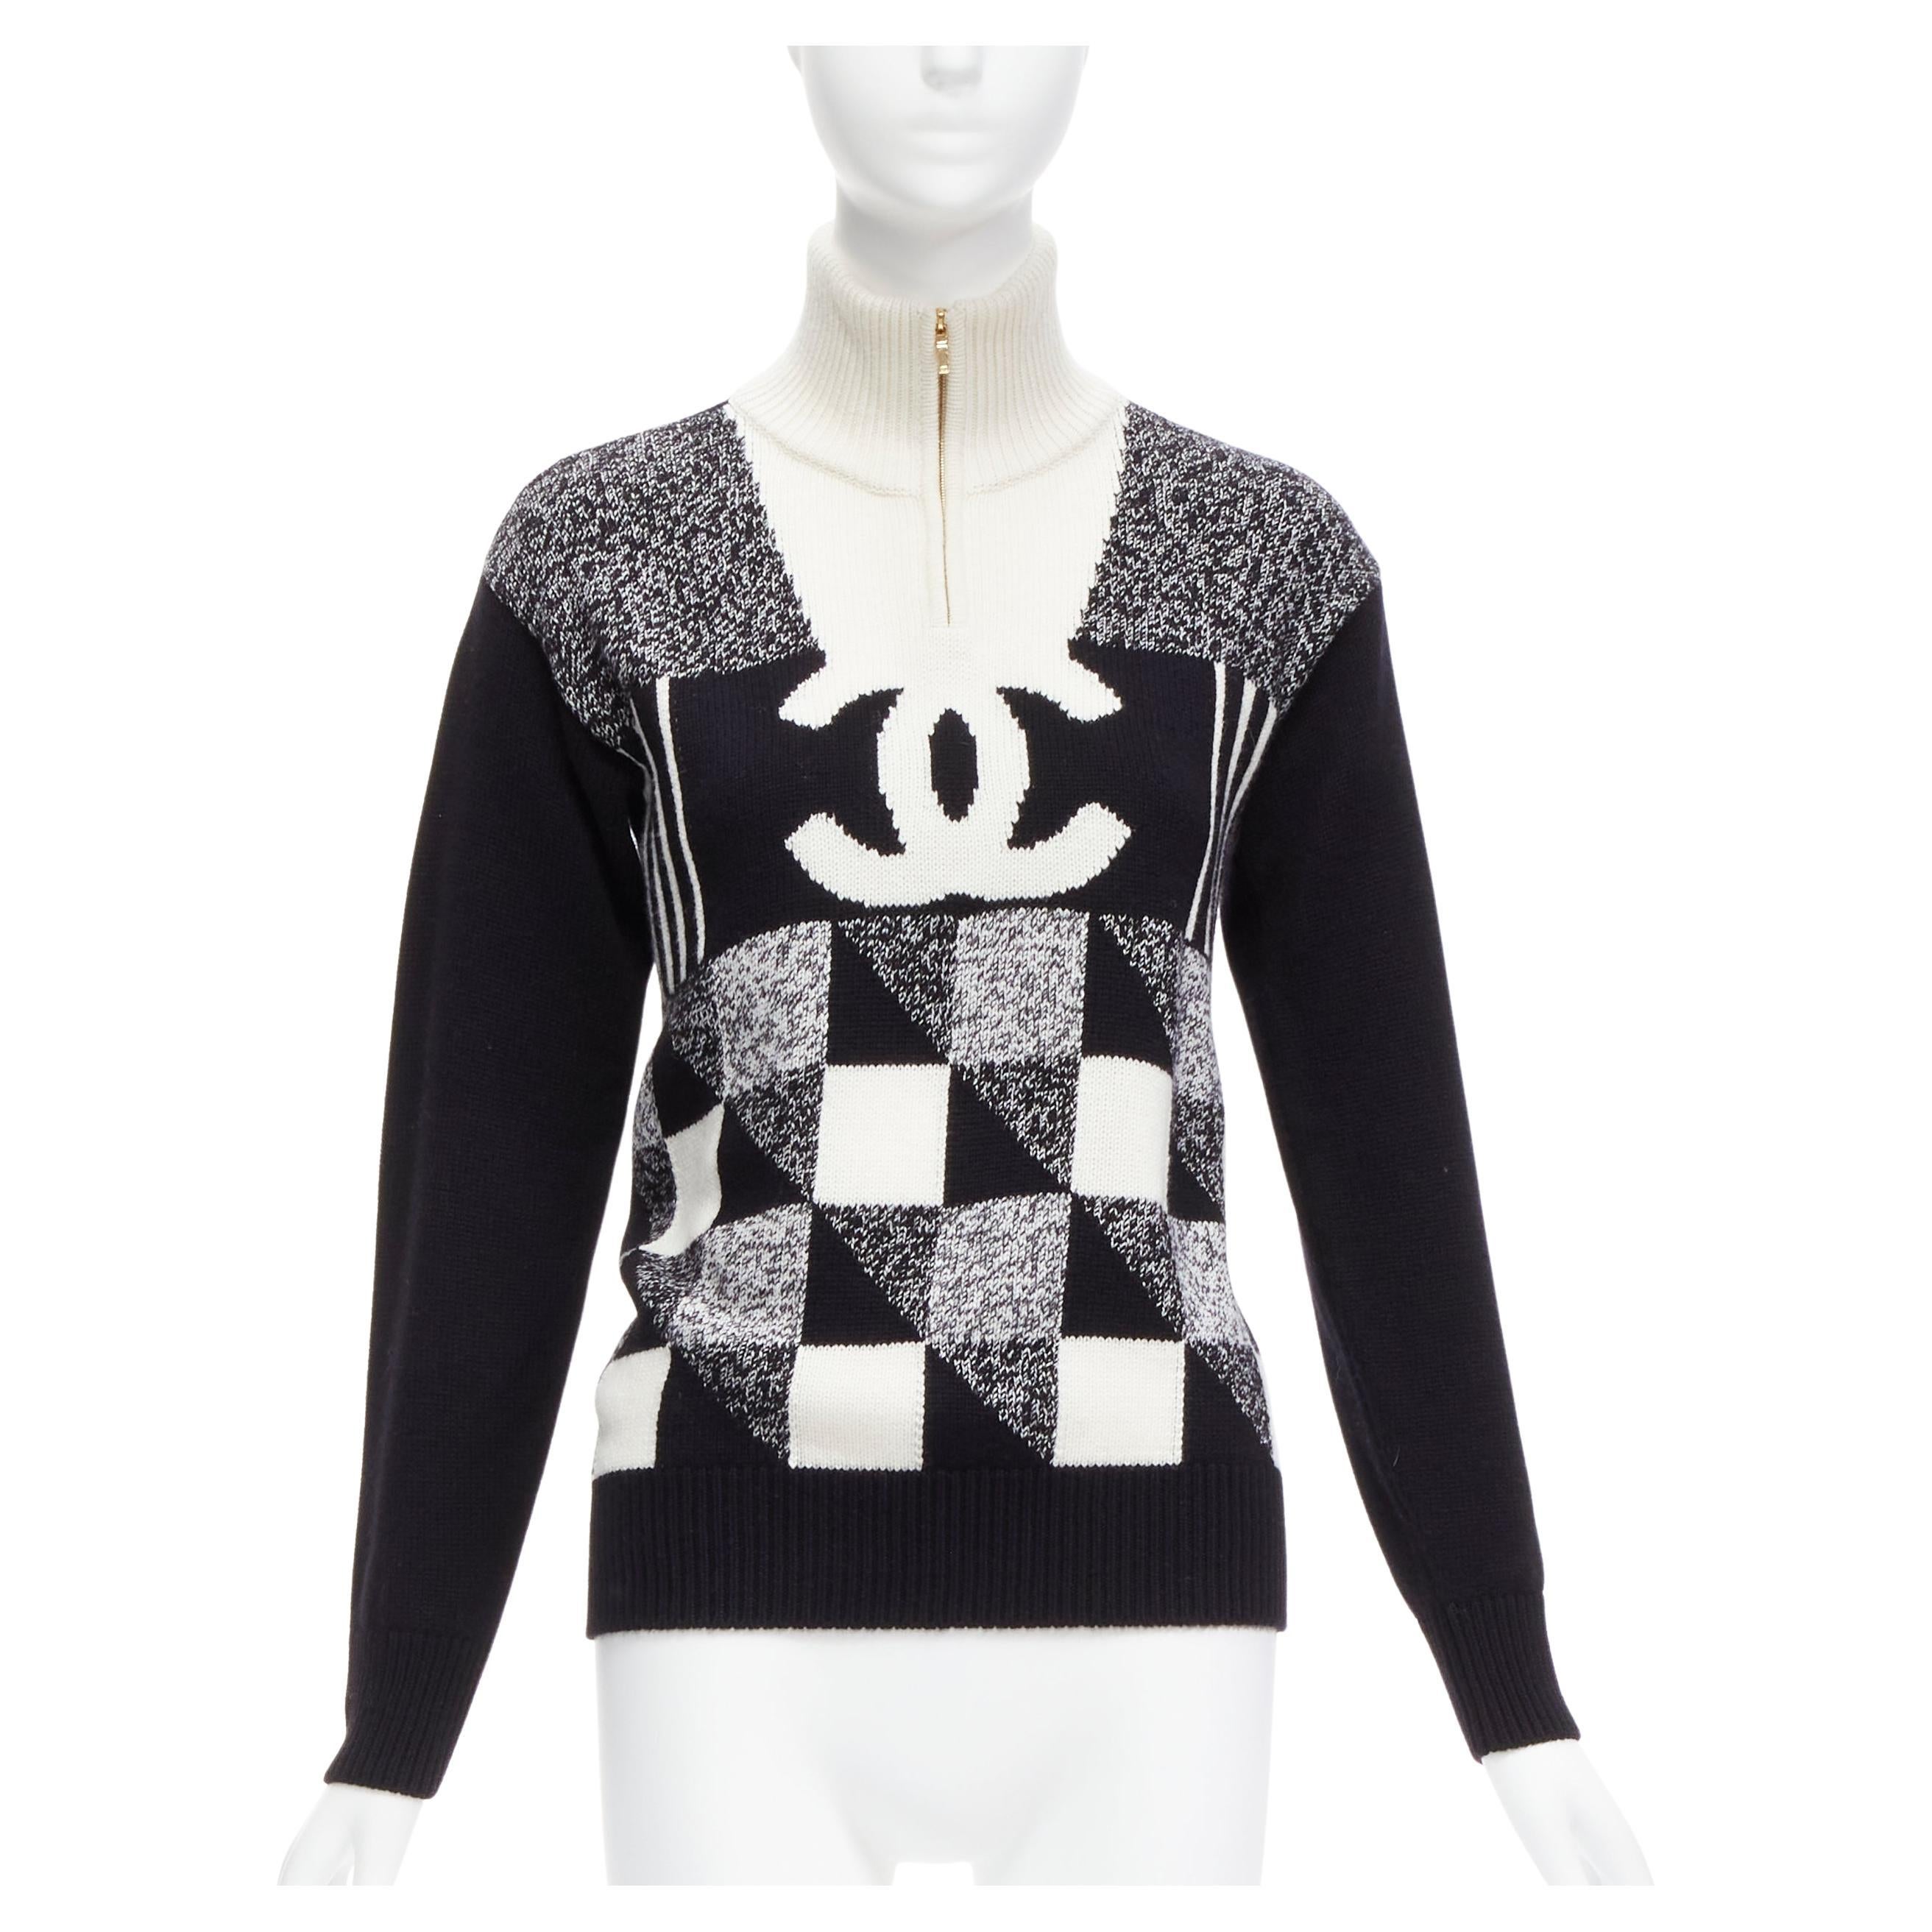 Chanel Black/White Tweed Jacket with Removable Cuffs – Encore Resale.com